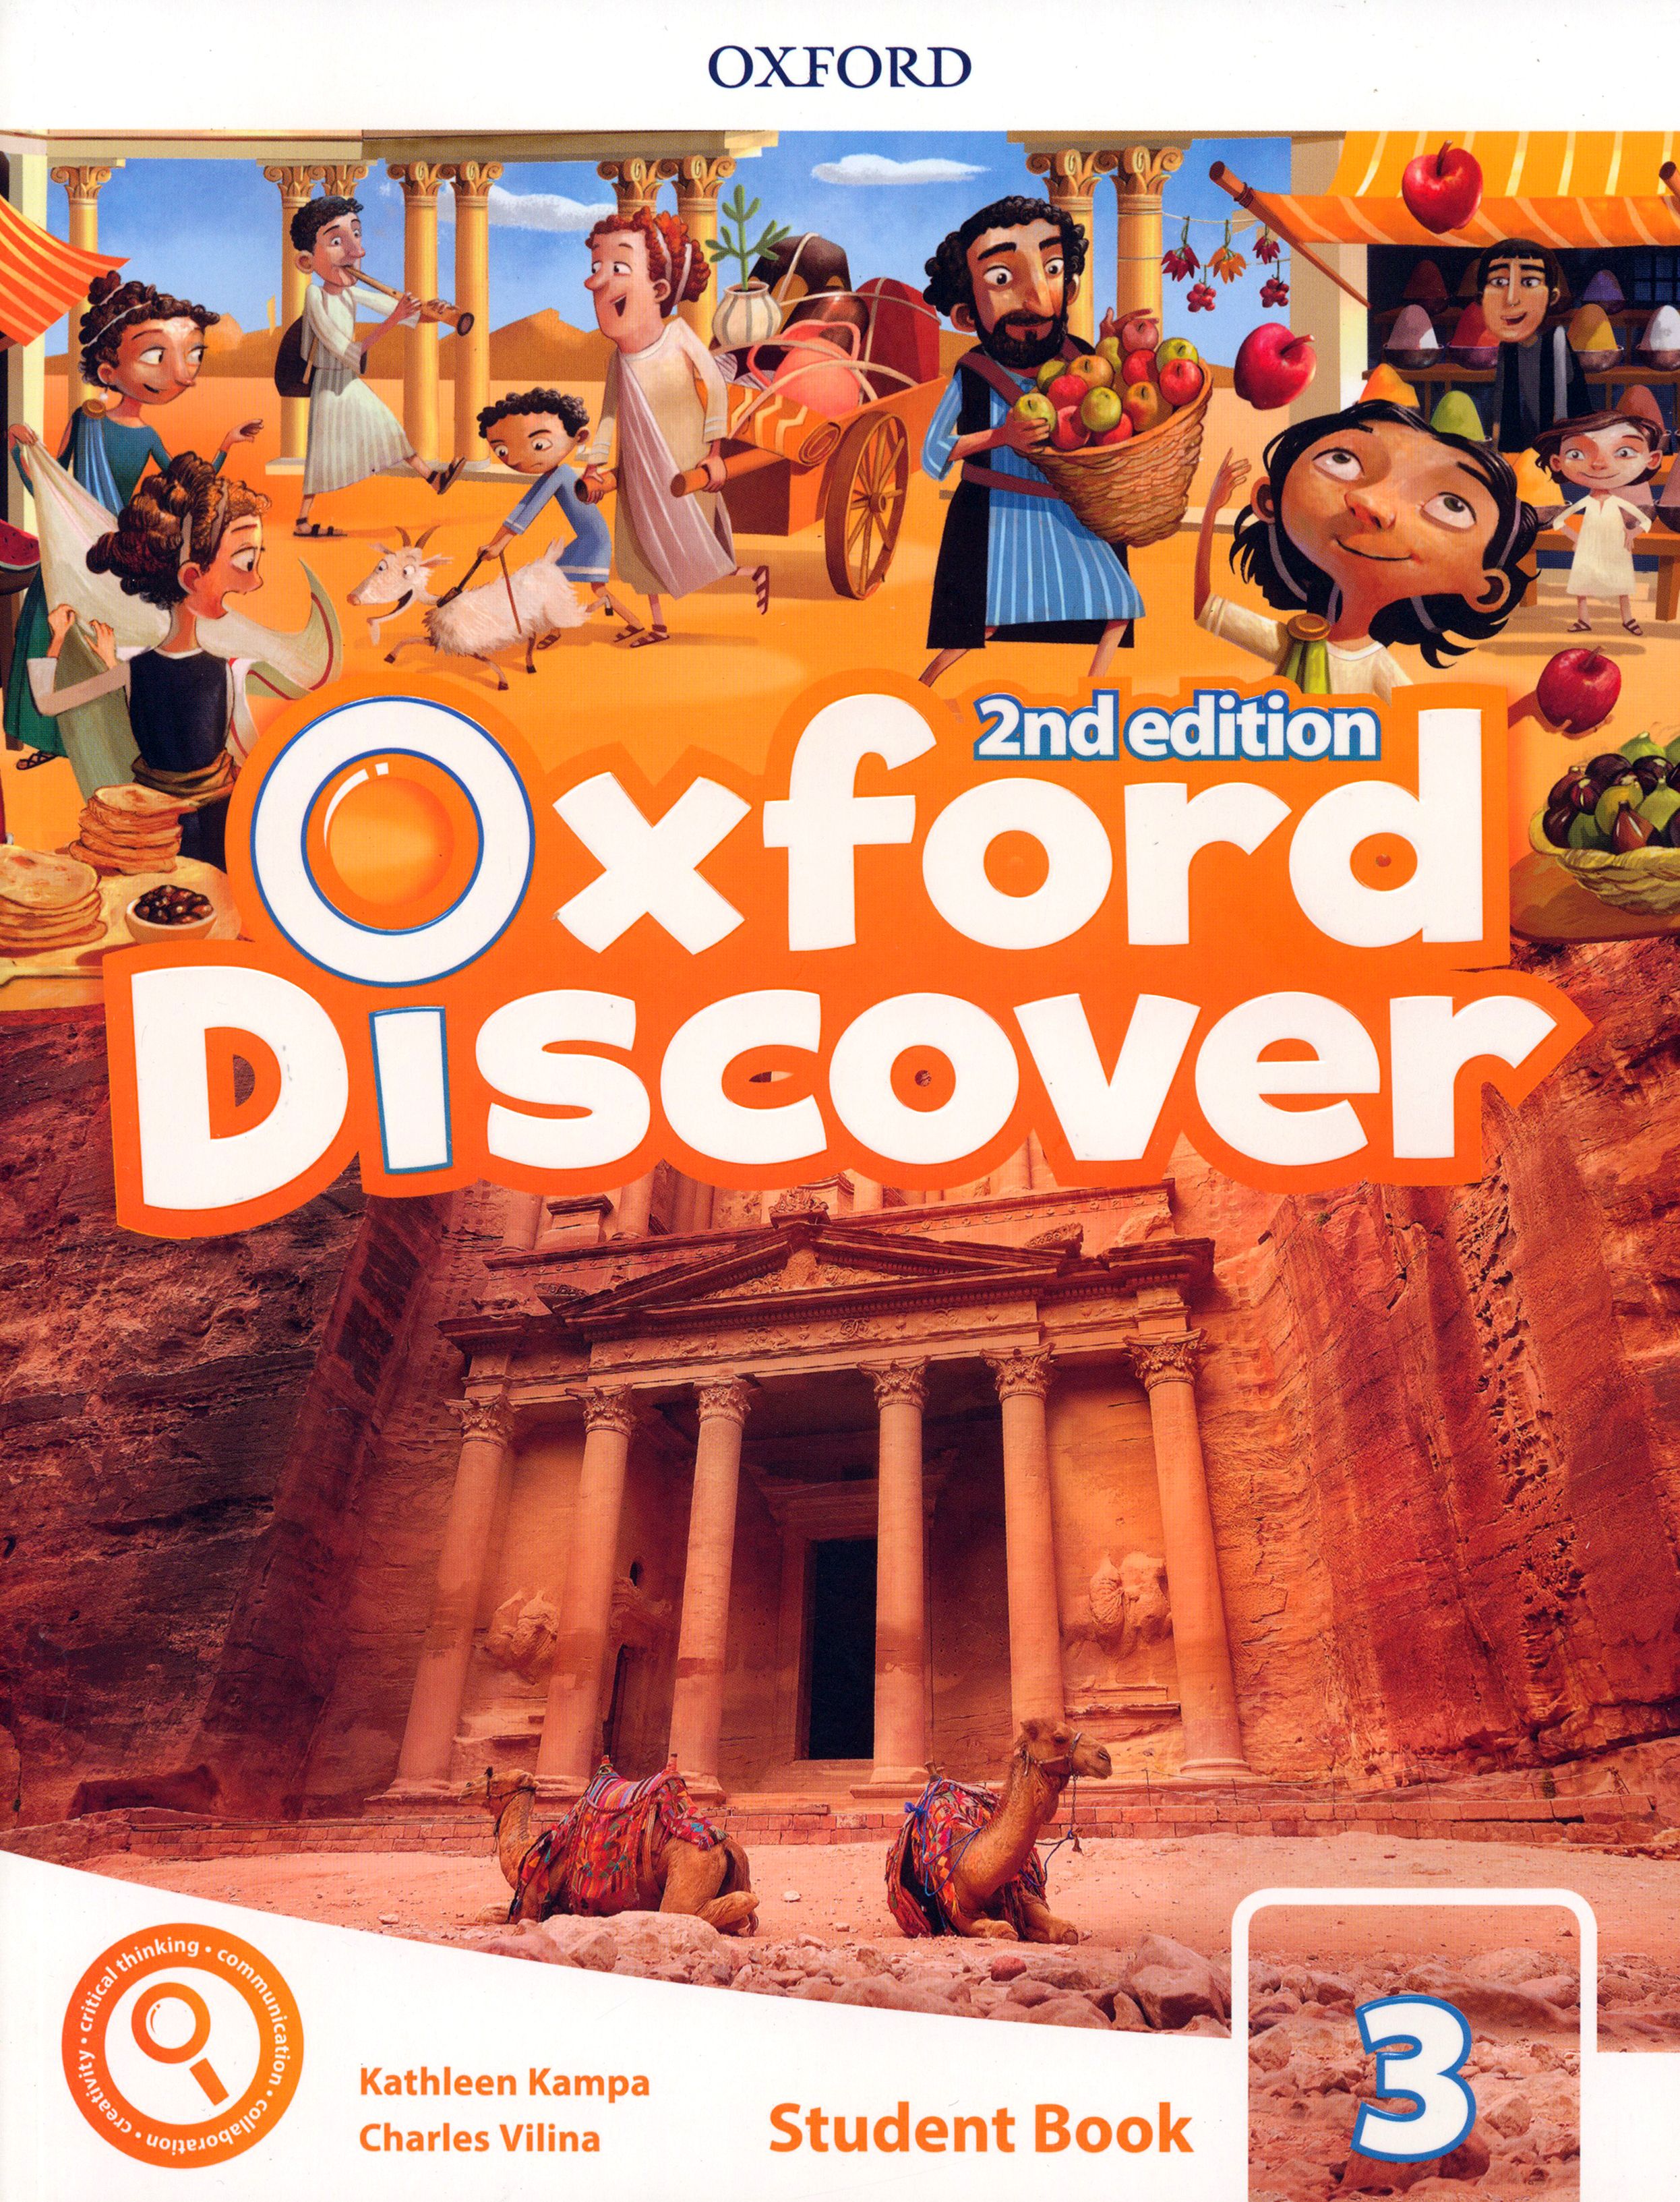 Oxford discover (2nd Edition) 3 student's book. Oxford discover 1 student's book 2nd Edition. Oxford discover 1 student book 2nd Edition Audio. Oxford discover 1 (student’s book, Workbook). Учебник discover